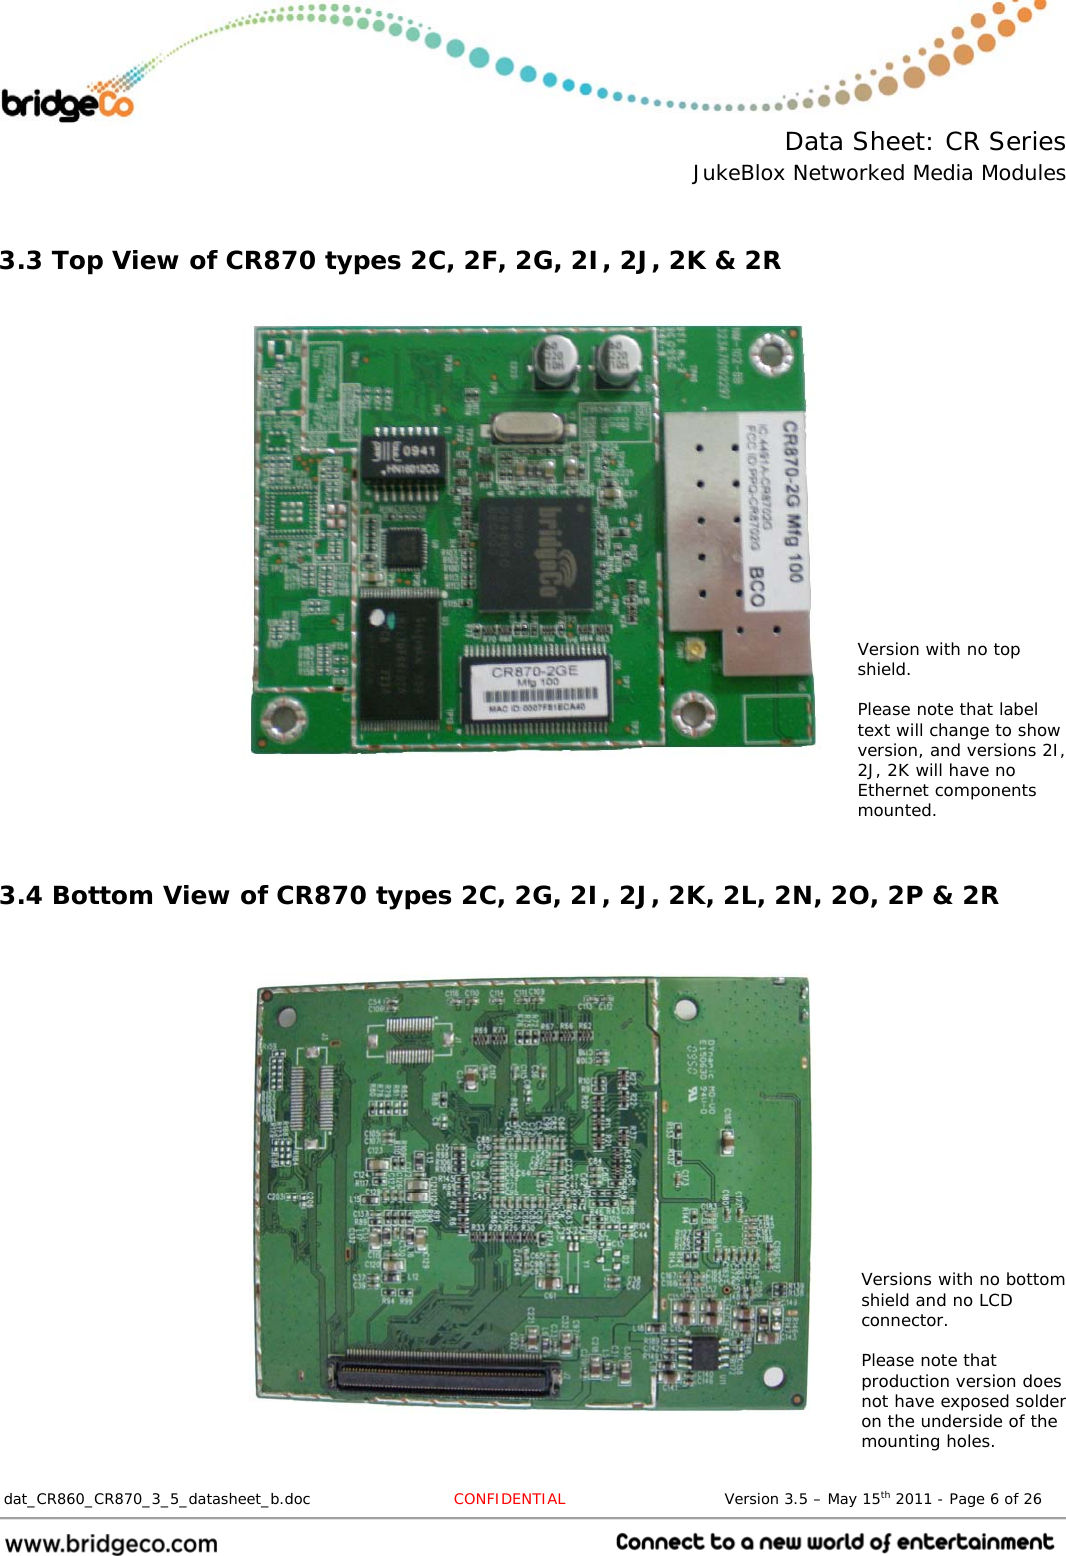  Data Sheet: CR Series JukeBlox Networked Media Modules  dat_CR860_CR870_3_5_datasheet_b.doc   CONFIDENTIAL                               Version 3.5 – May 15th 2011 - Page 6 of 26                                  3.3 Top View of CR870 types 2C, 2F, 2G, 2I, 2J, 2K &amp; 2R            3.4 Bottom View of CR870 types 2C, 2G, 2I, 2J, 2K, 2L, 2N, 2O, 2P &amp; 2R      Versions with no bottom shield and no LCD connector.  Please note that production version does not have exposed solder on the underside of the mounting holes. Version with no top shield.  Please note that label text will change to show version, and versions 2I, 2J, 2K will have no Ethernet components mounted. 